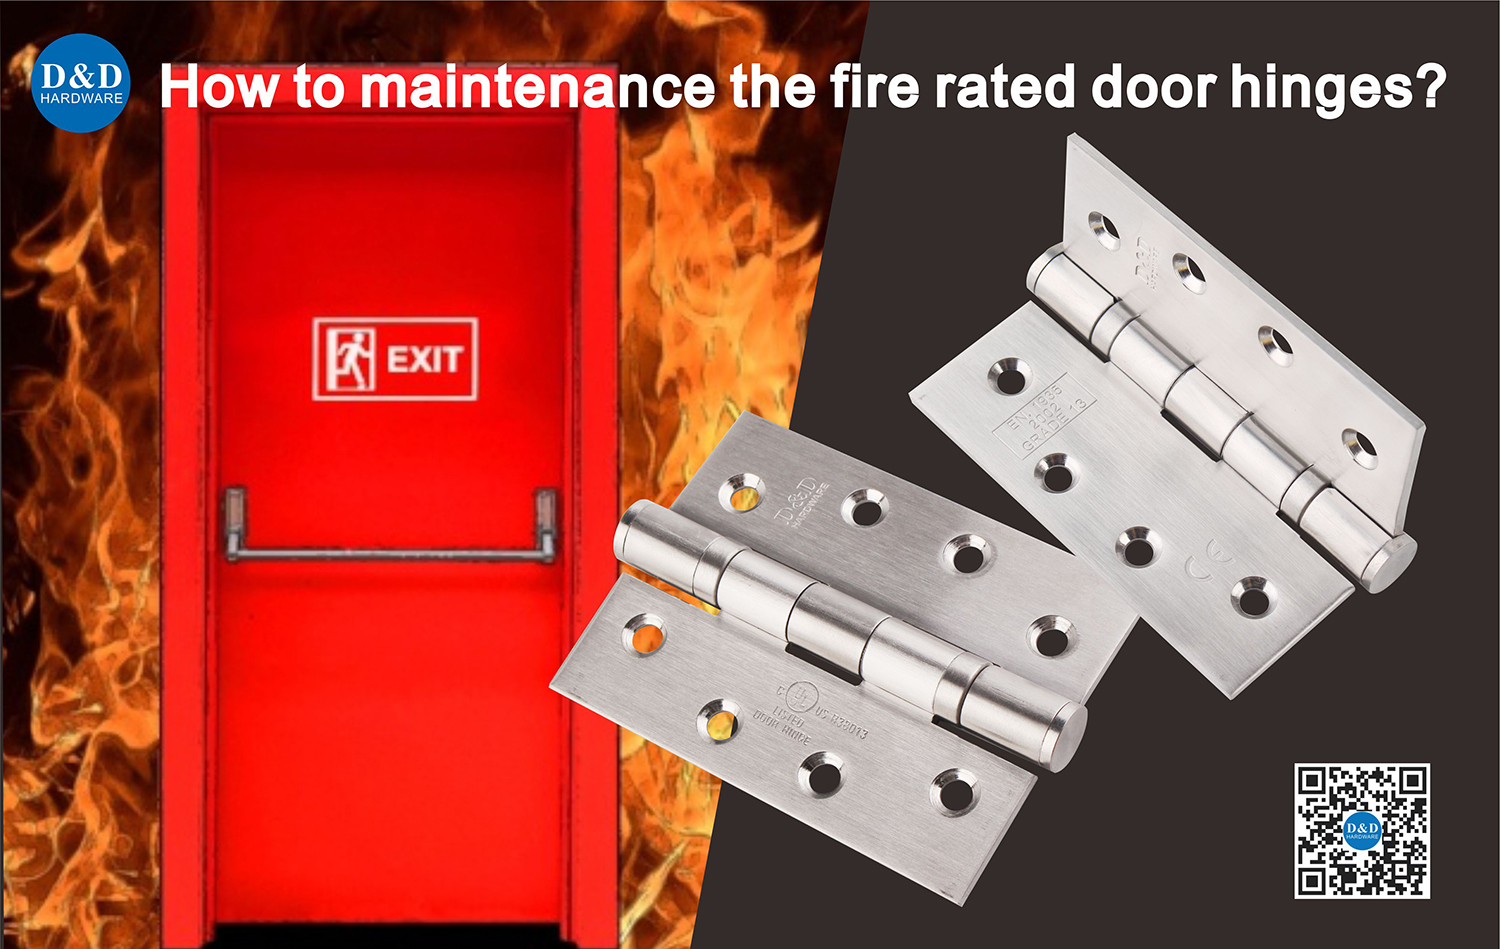 How to maintenance the fire rated door hinges?